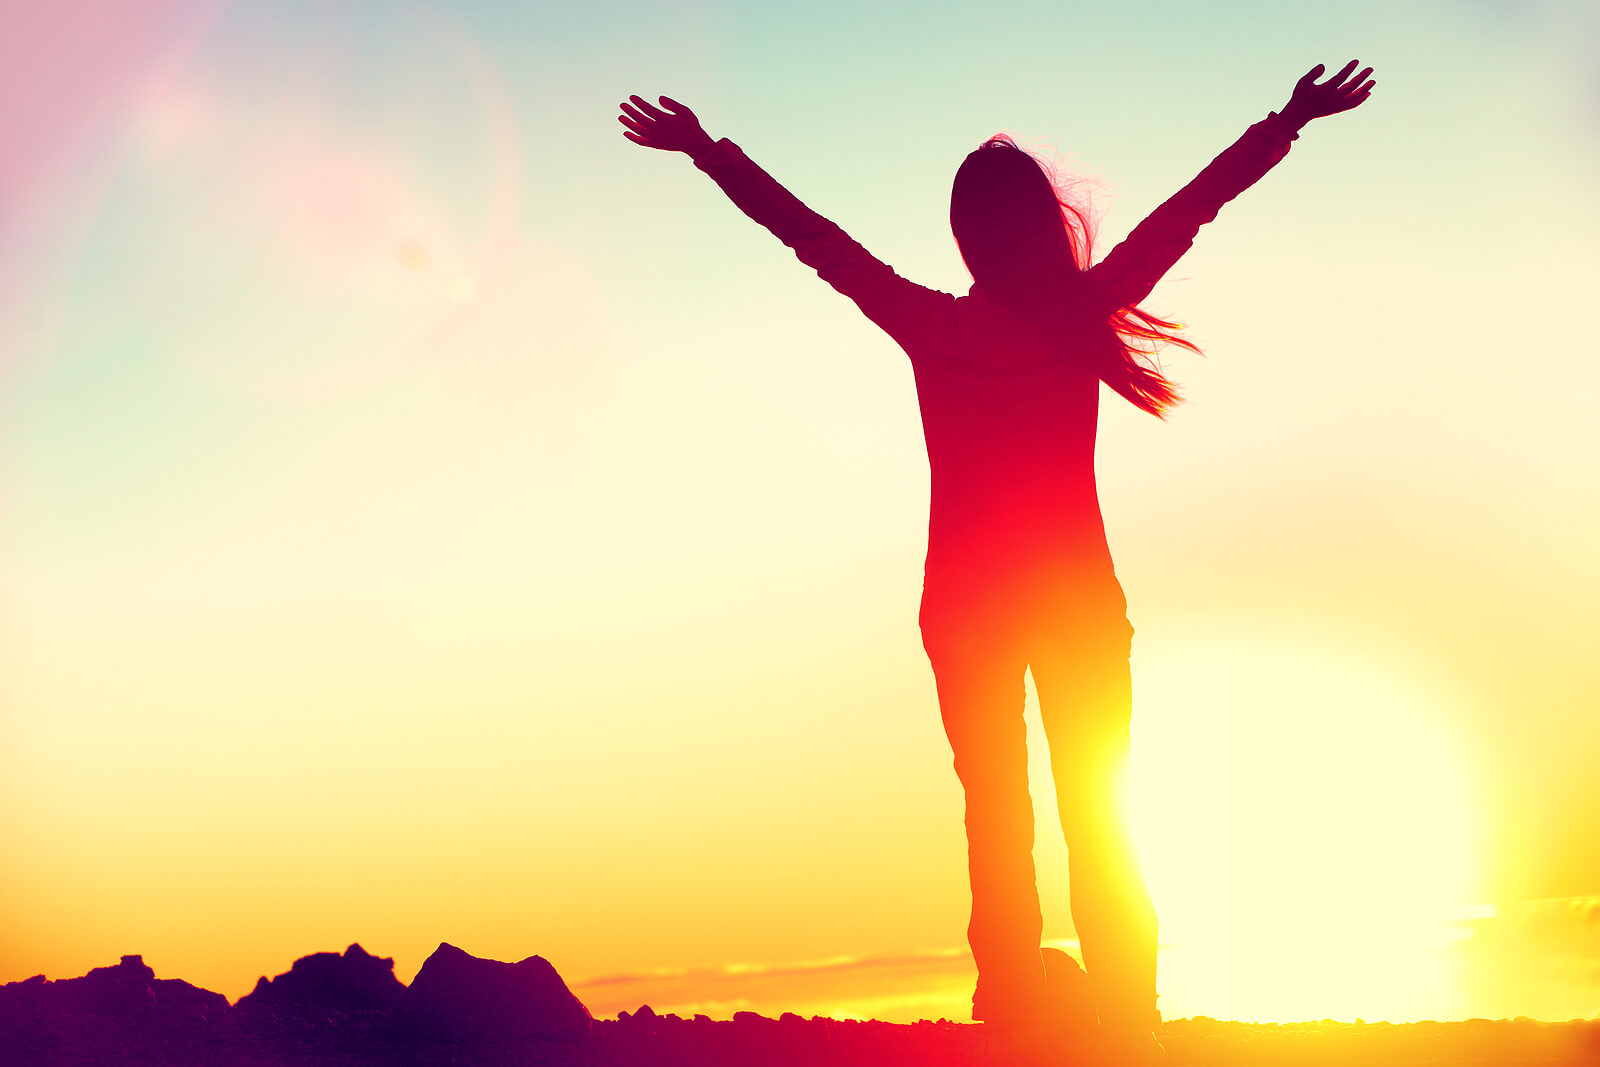 Woman standing on a hill at sunset with her arms raised triumphantly above her head in celebration of success. There is a light at the end of the tunnel. Our trauma therapists in Kentucky can help get you there!